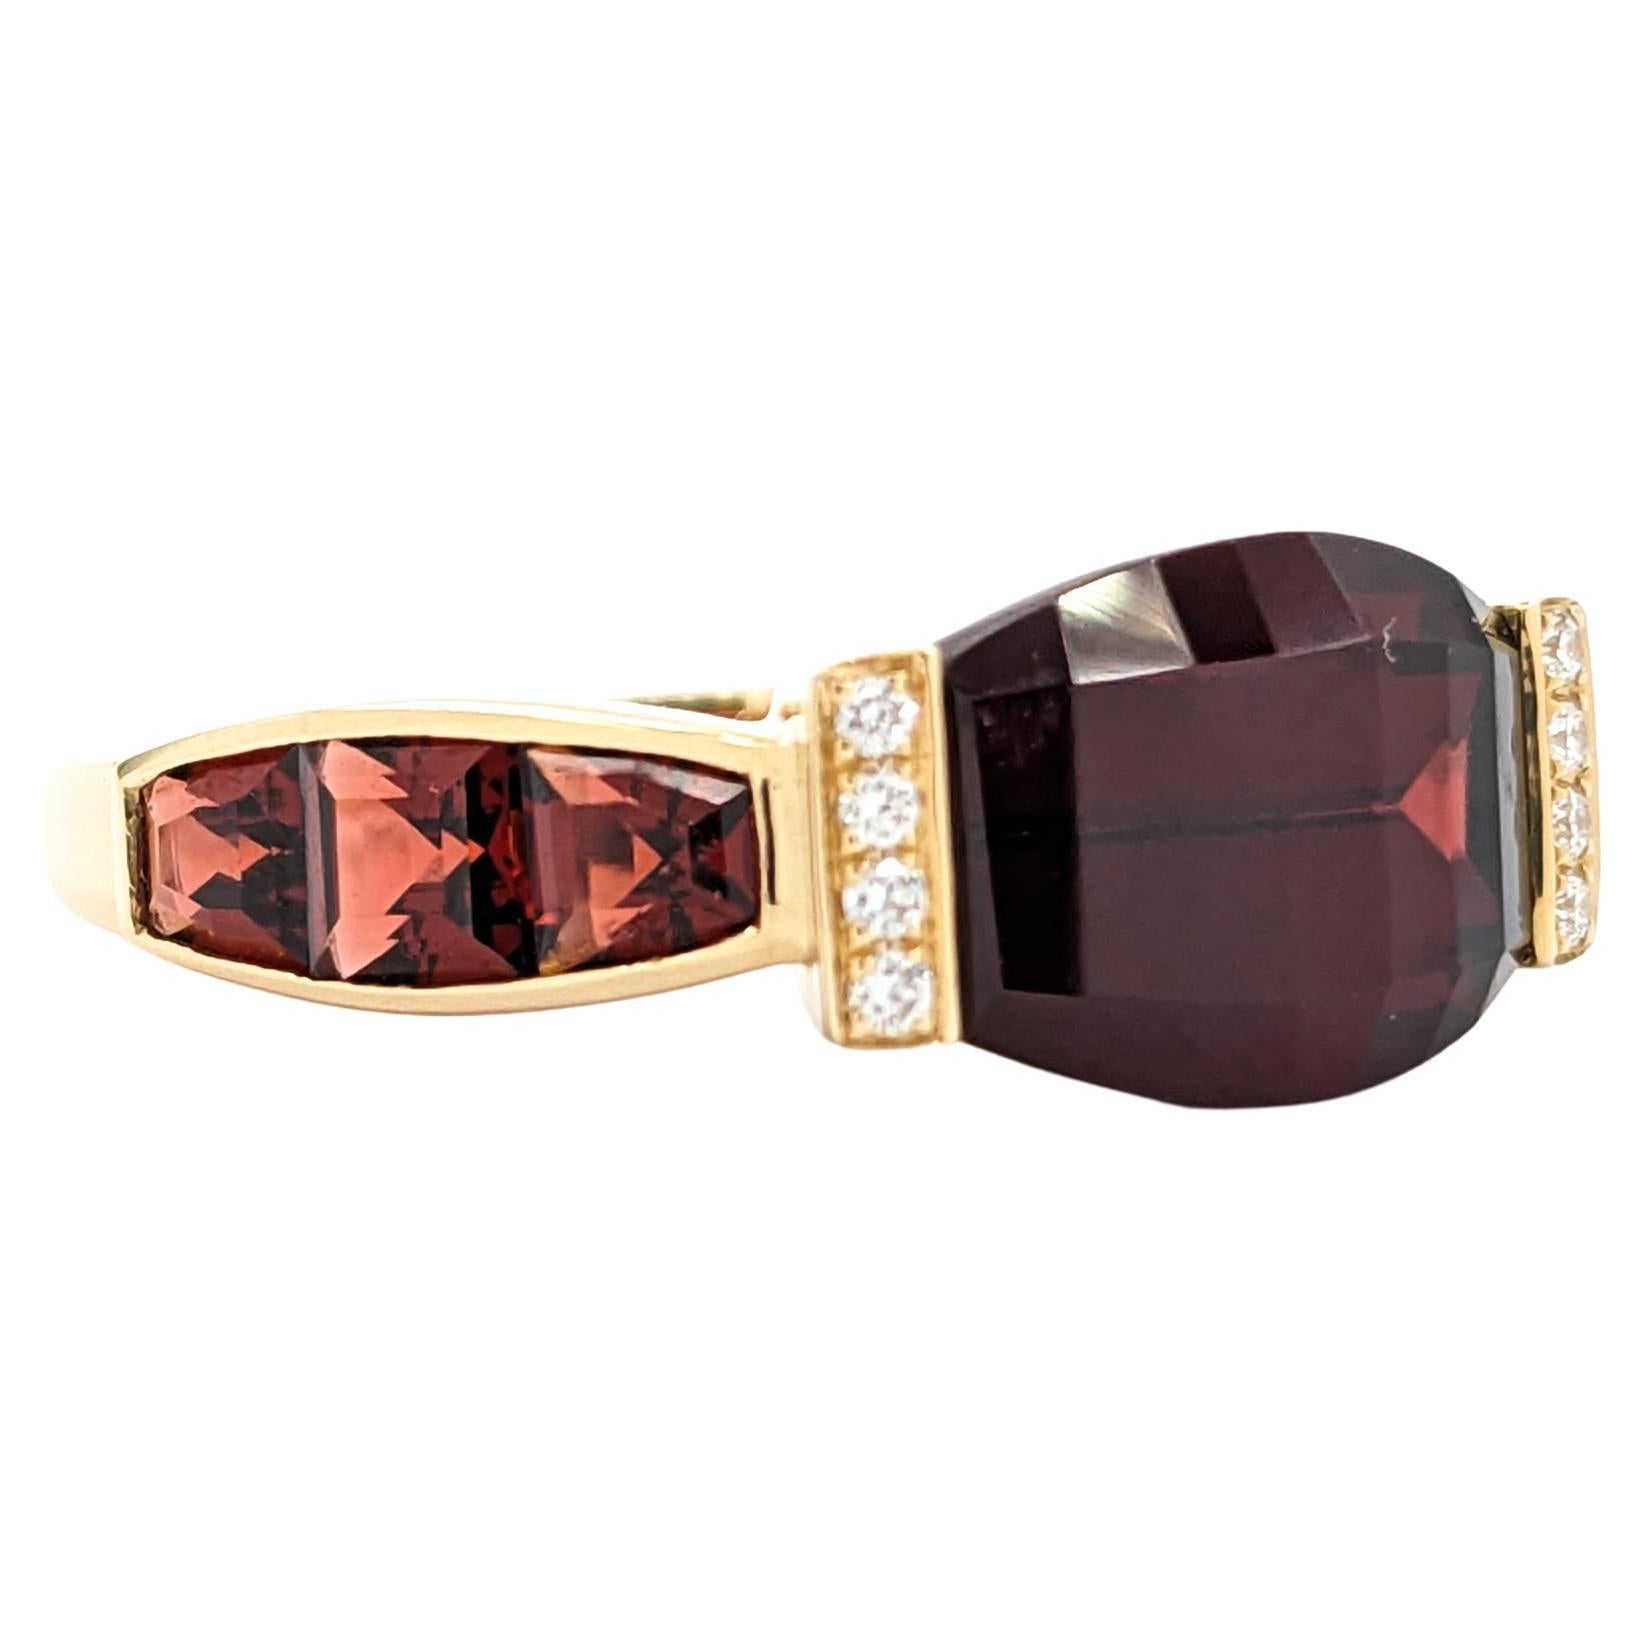 3.73ctw Pyrite Garnet Ring With Diamonds in Yellow Gold